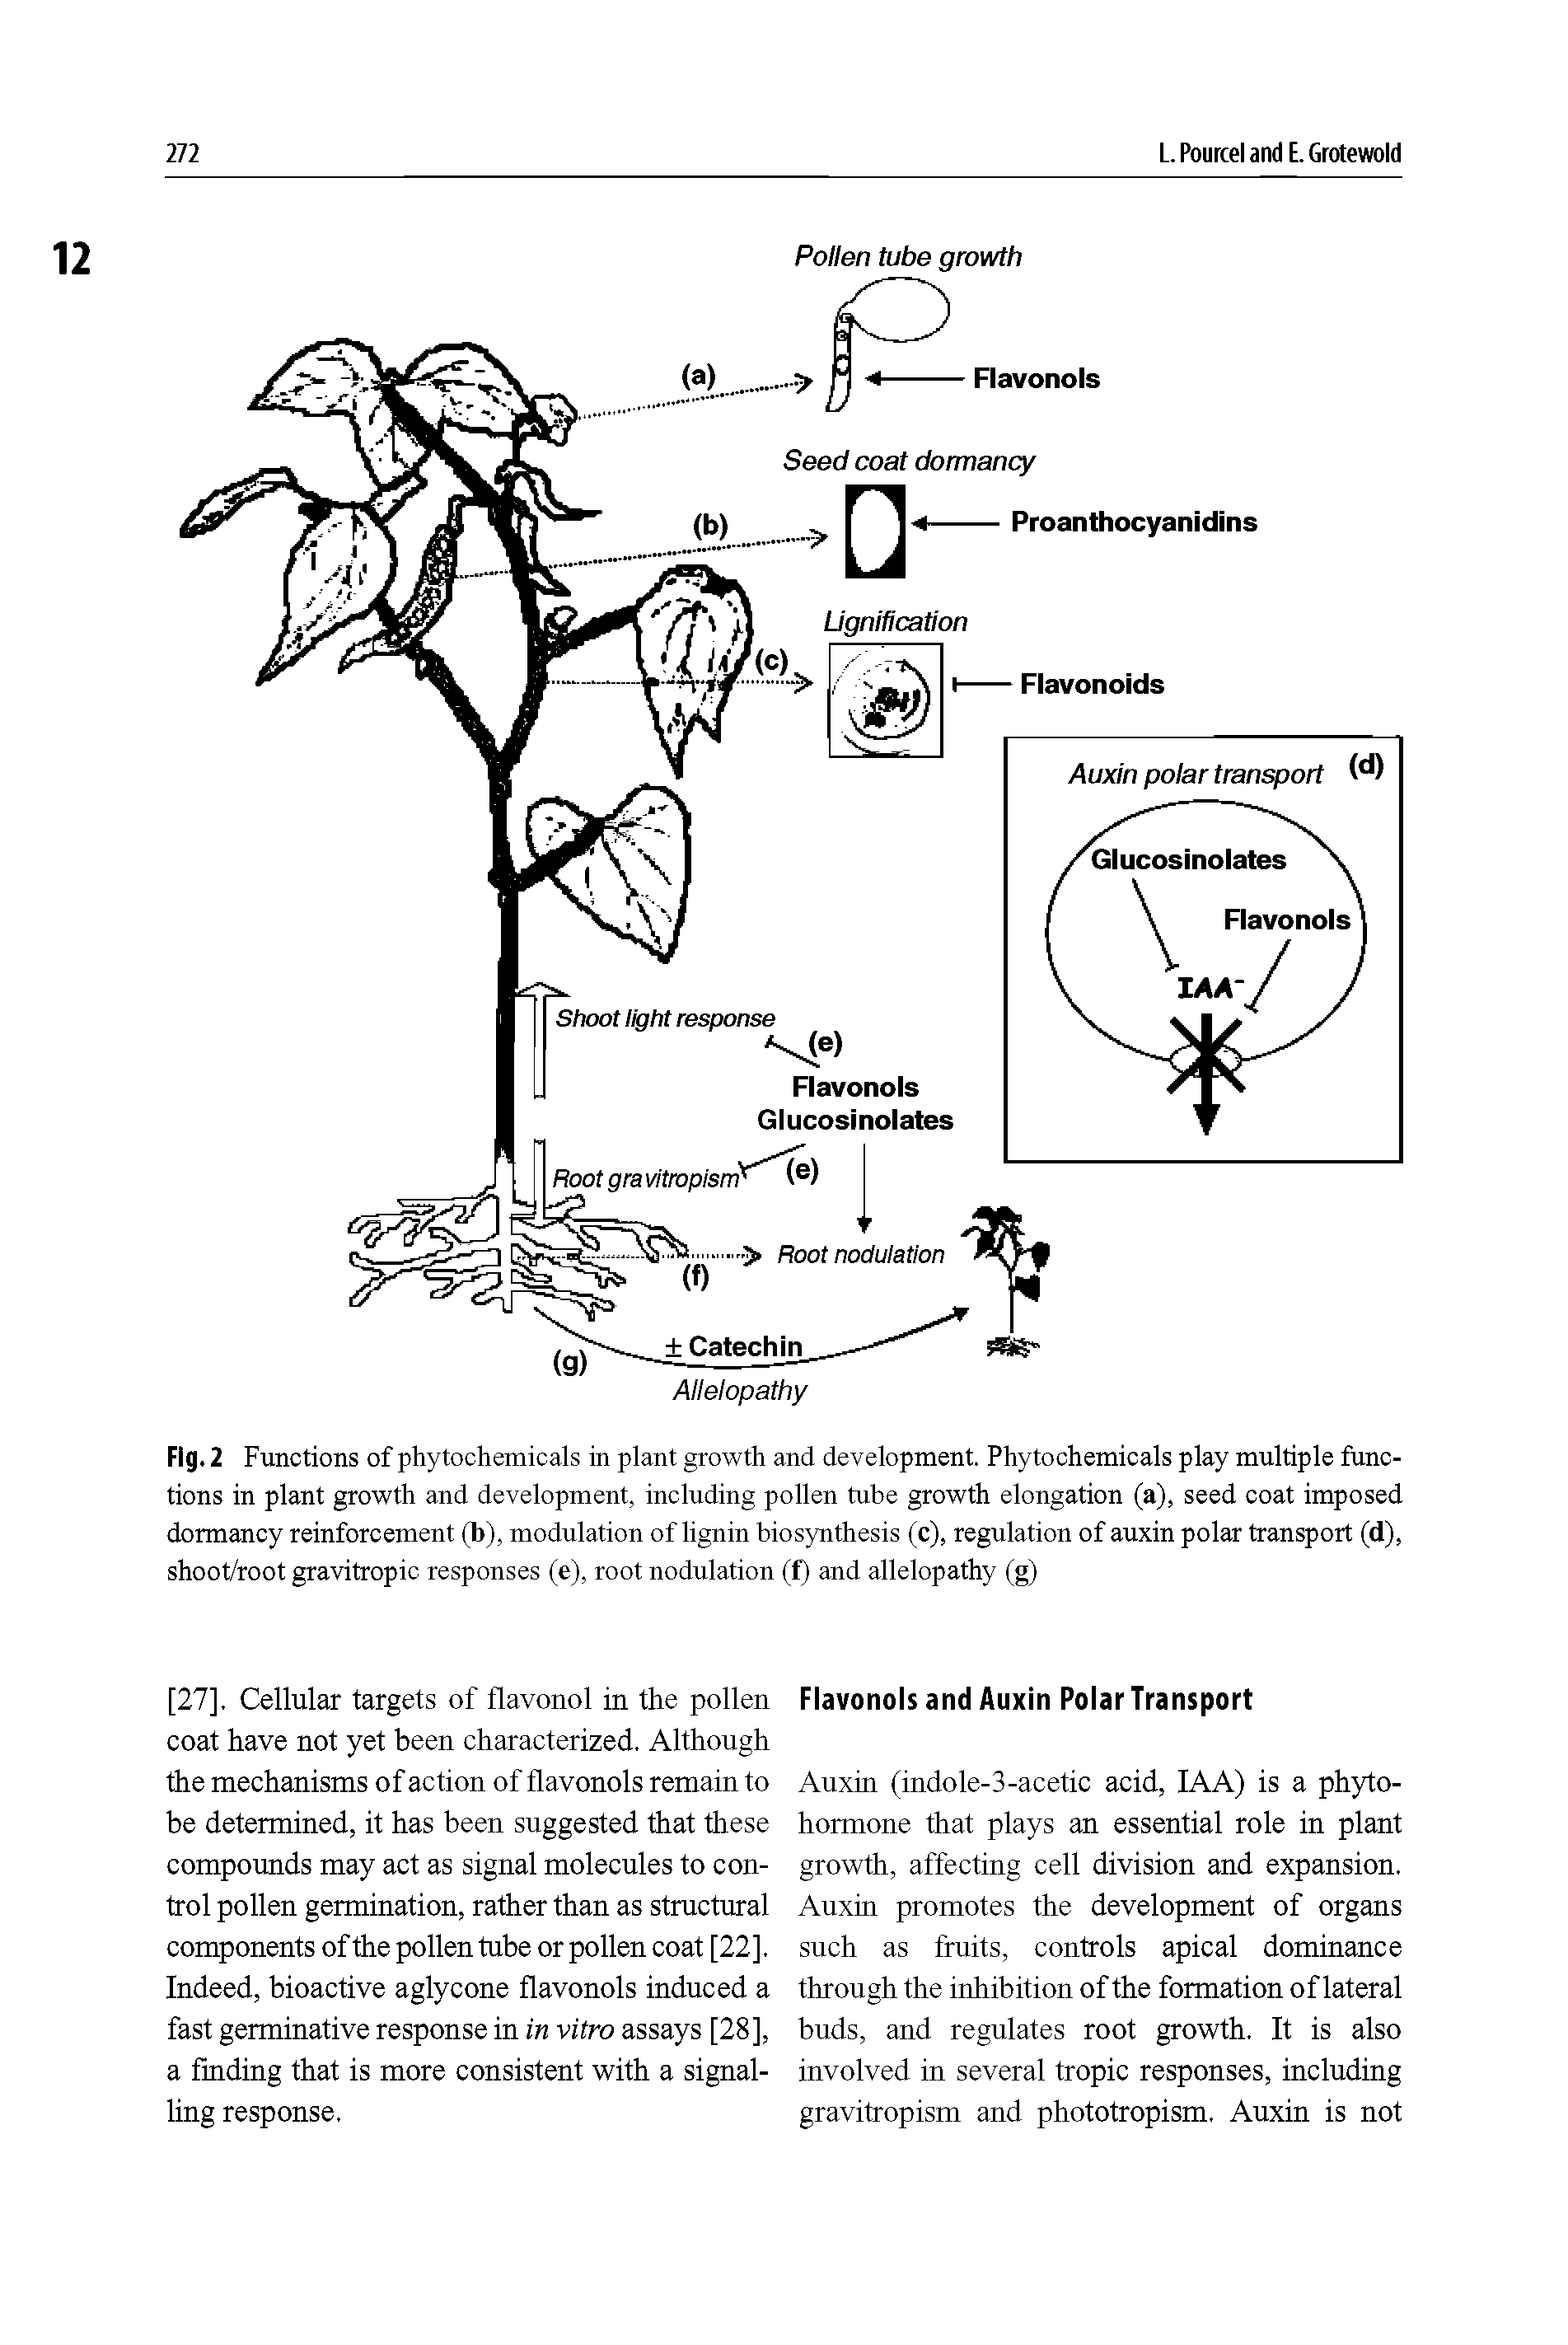 Fig. 2 Functions of phytochemicals in plant growth and development. Phytoohemicals play multiple functions in plant growth and development, including pollen tube growth elongation (a), seed coat imposed dormancy reinforcement (b), modulation of lignin biosynthesis (c), regulation of auxin polar transport (d), shoot/root gravitropic responses (e), root nodulation (f) and allelopathy (g)...